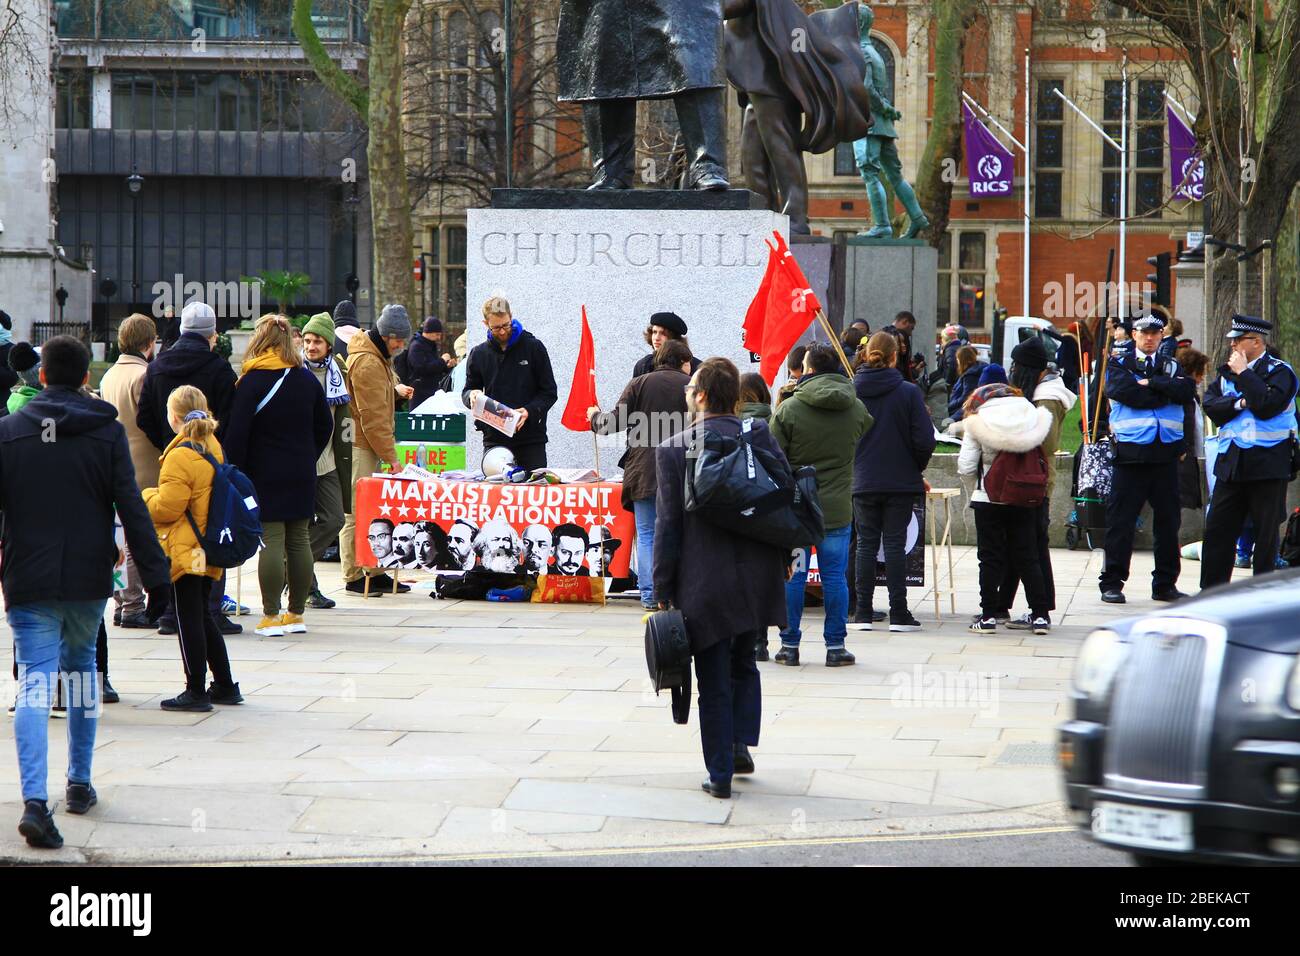 MARXIST STUDENT FEDERATION. BANNER ADVERTISING MARXIST STUDENT FEDERATION STAND BY CHURCHILL STATUE IN PARLIAMENT SQUARE, WESTMINSTER, LONDON, ENGLAND UNITED KINGDOM. MARXISM. Stock Photo